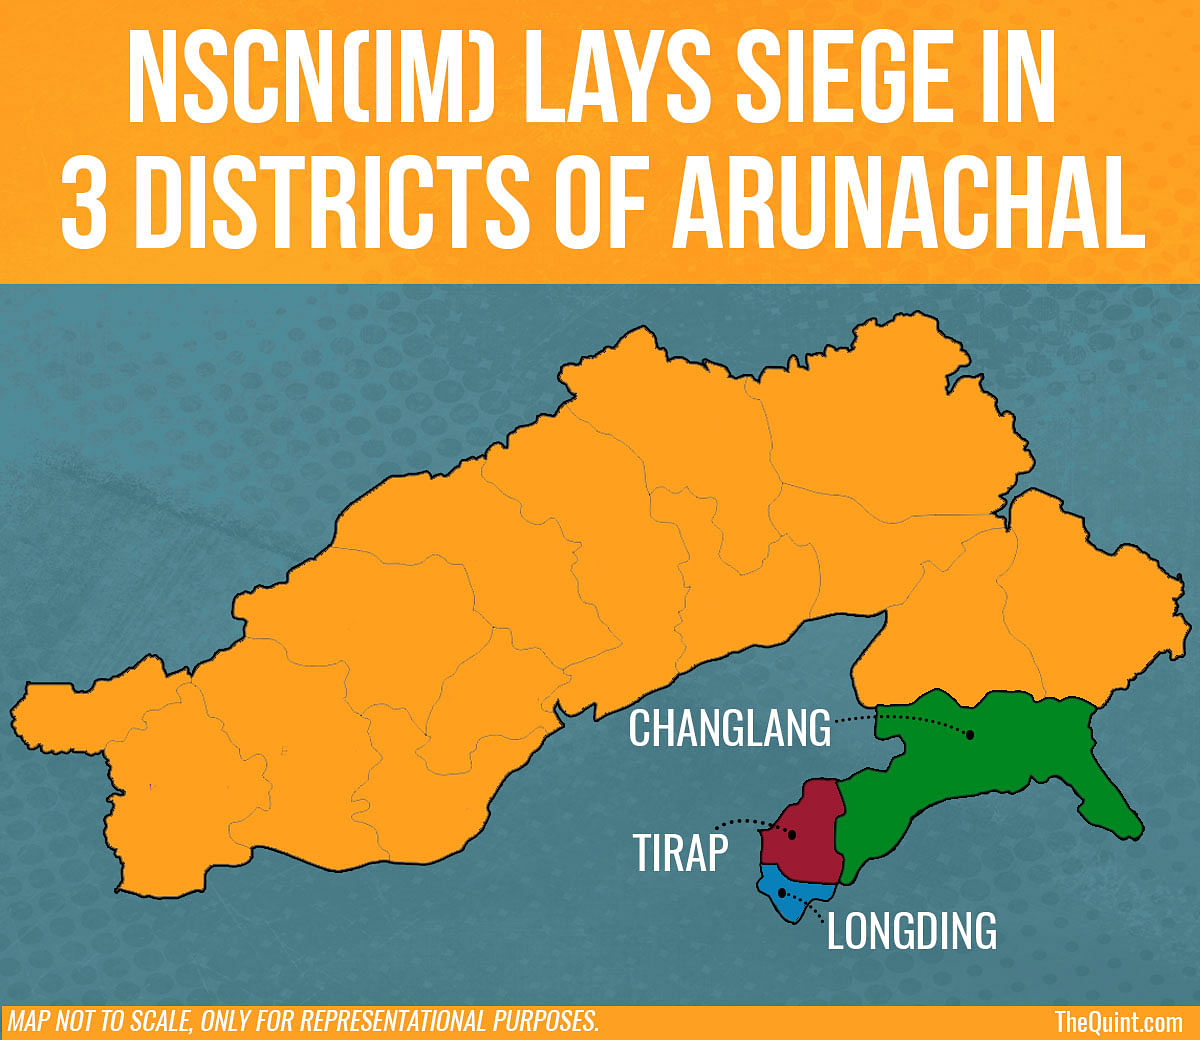 With NSCN(IM) rushing into three Arunachal districts dominated by NSCN(K), is Modi’s peace accord falling apart?